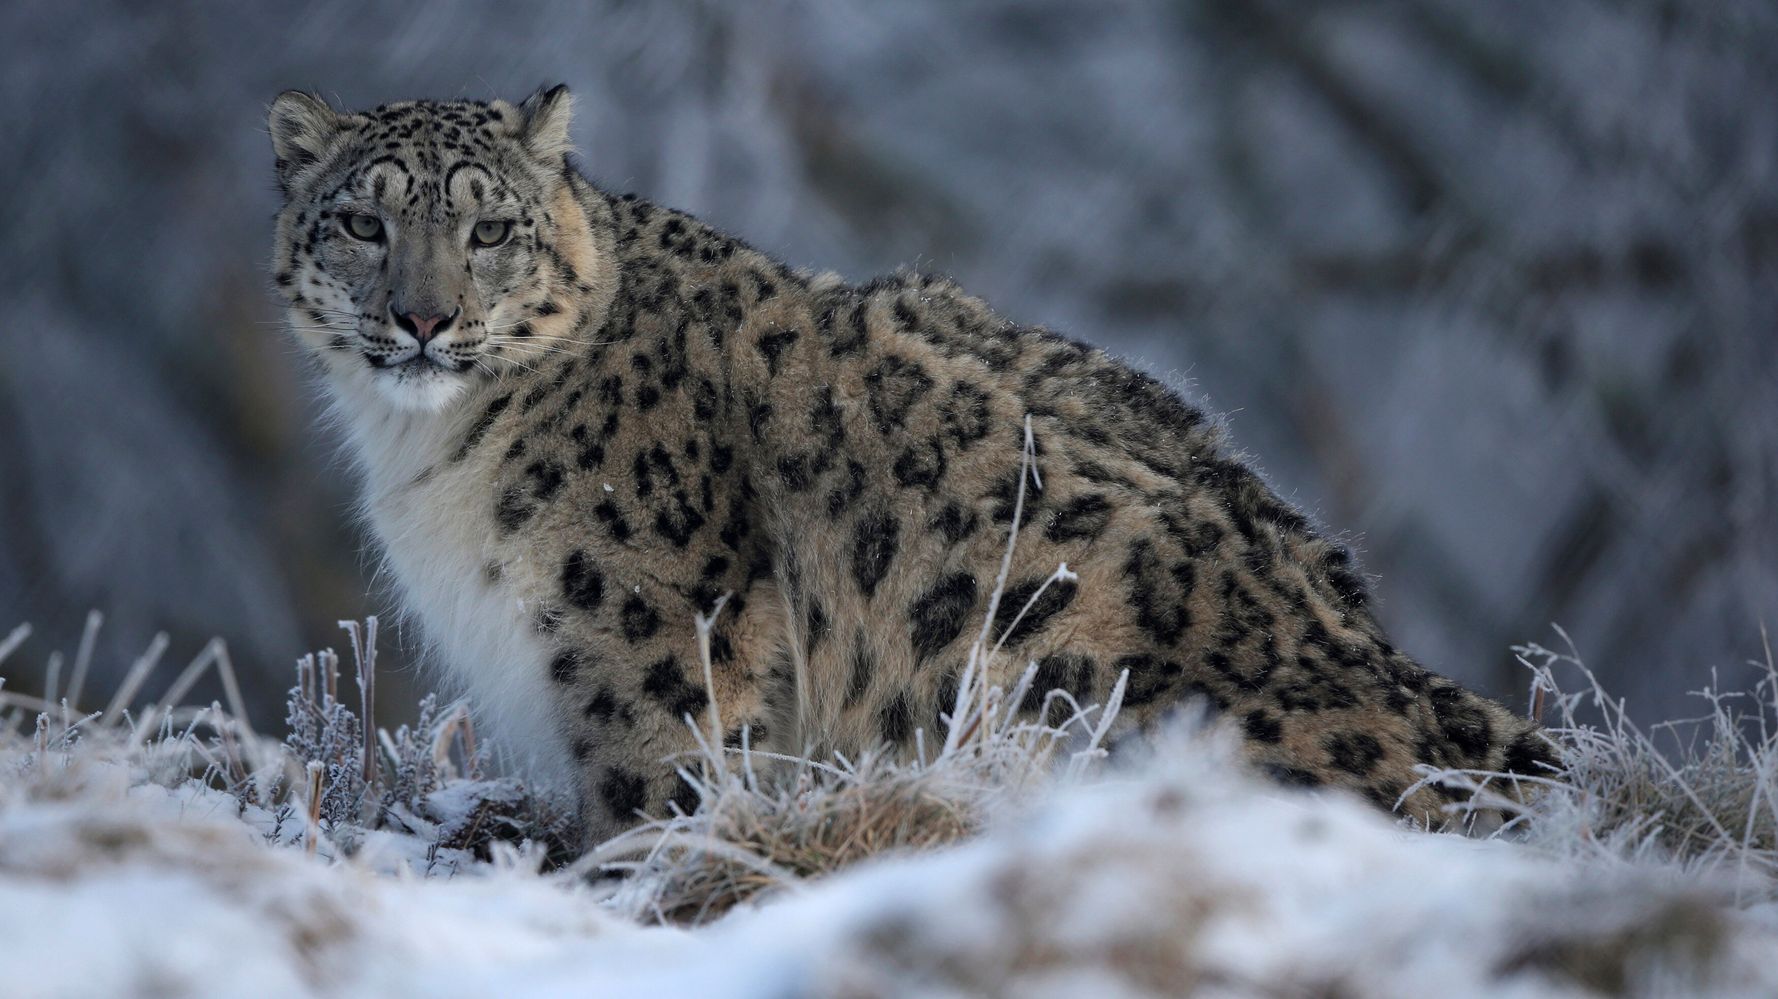 The Snow Leopard's Shift from “Endangered” to “Vulnerable”: Explained